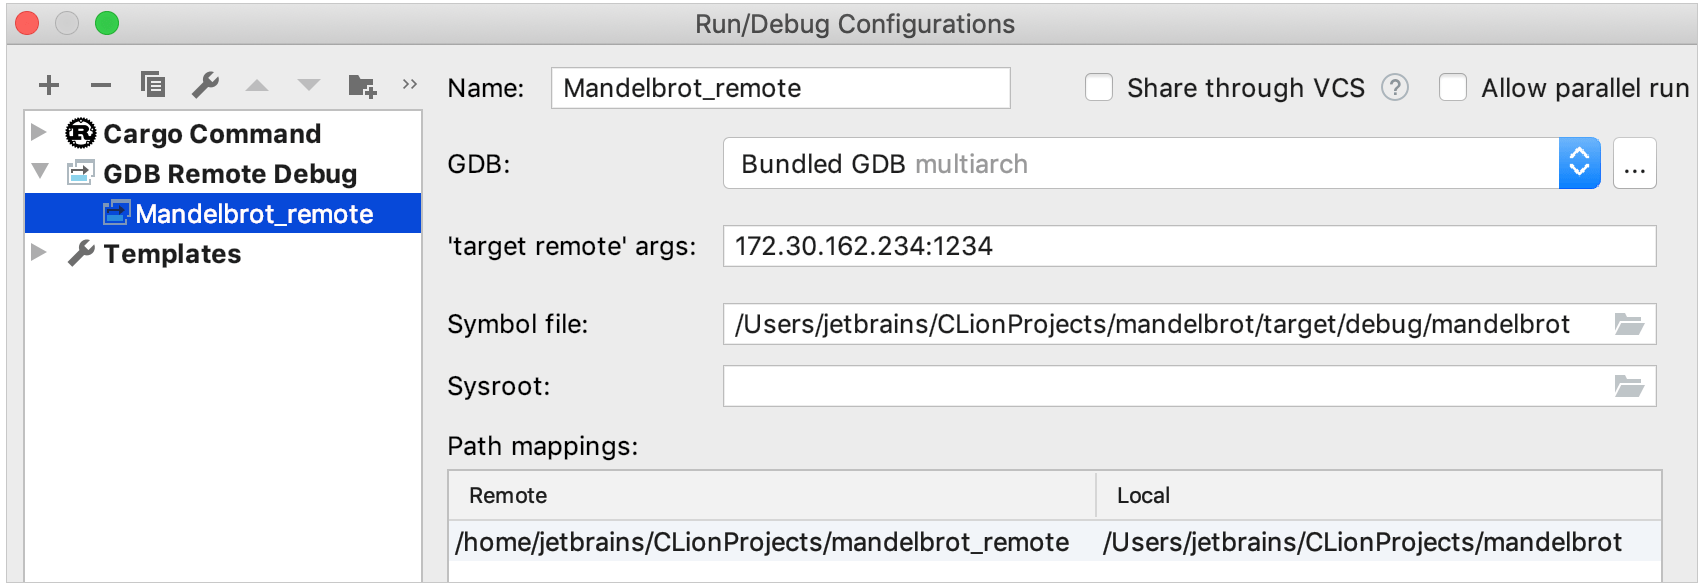 GDB remote debug configuration for a Rust project